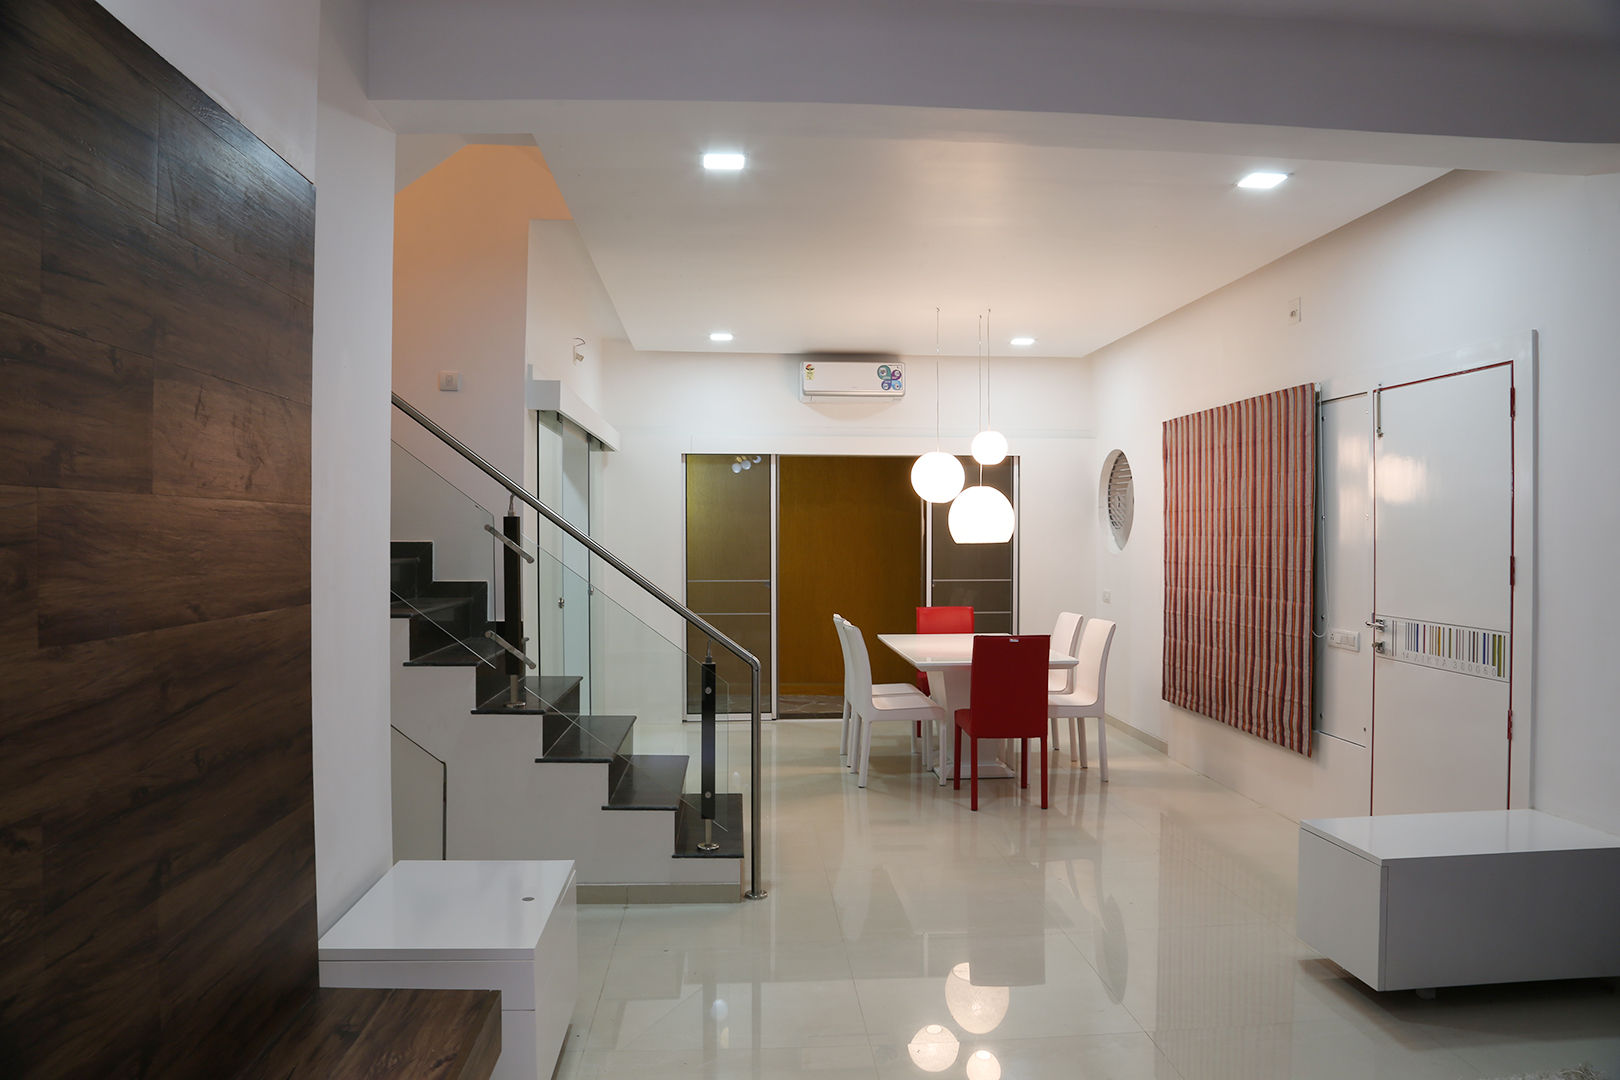 Single Family Private Residence, Ahmedabad, A New Dimension A New Dimension 餐廳